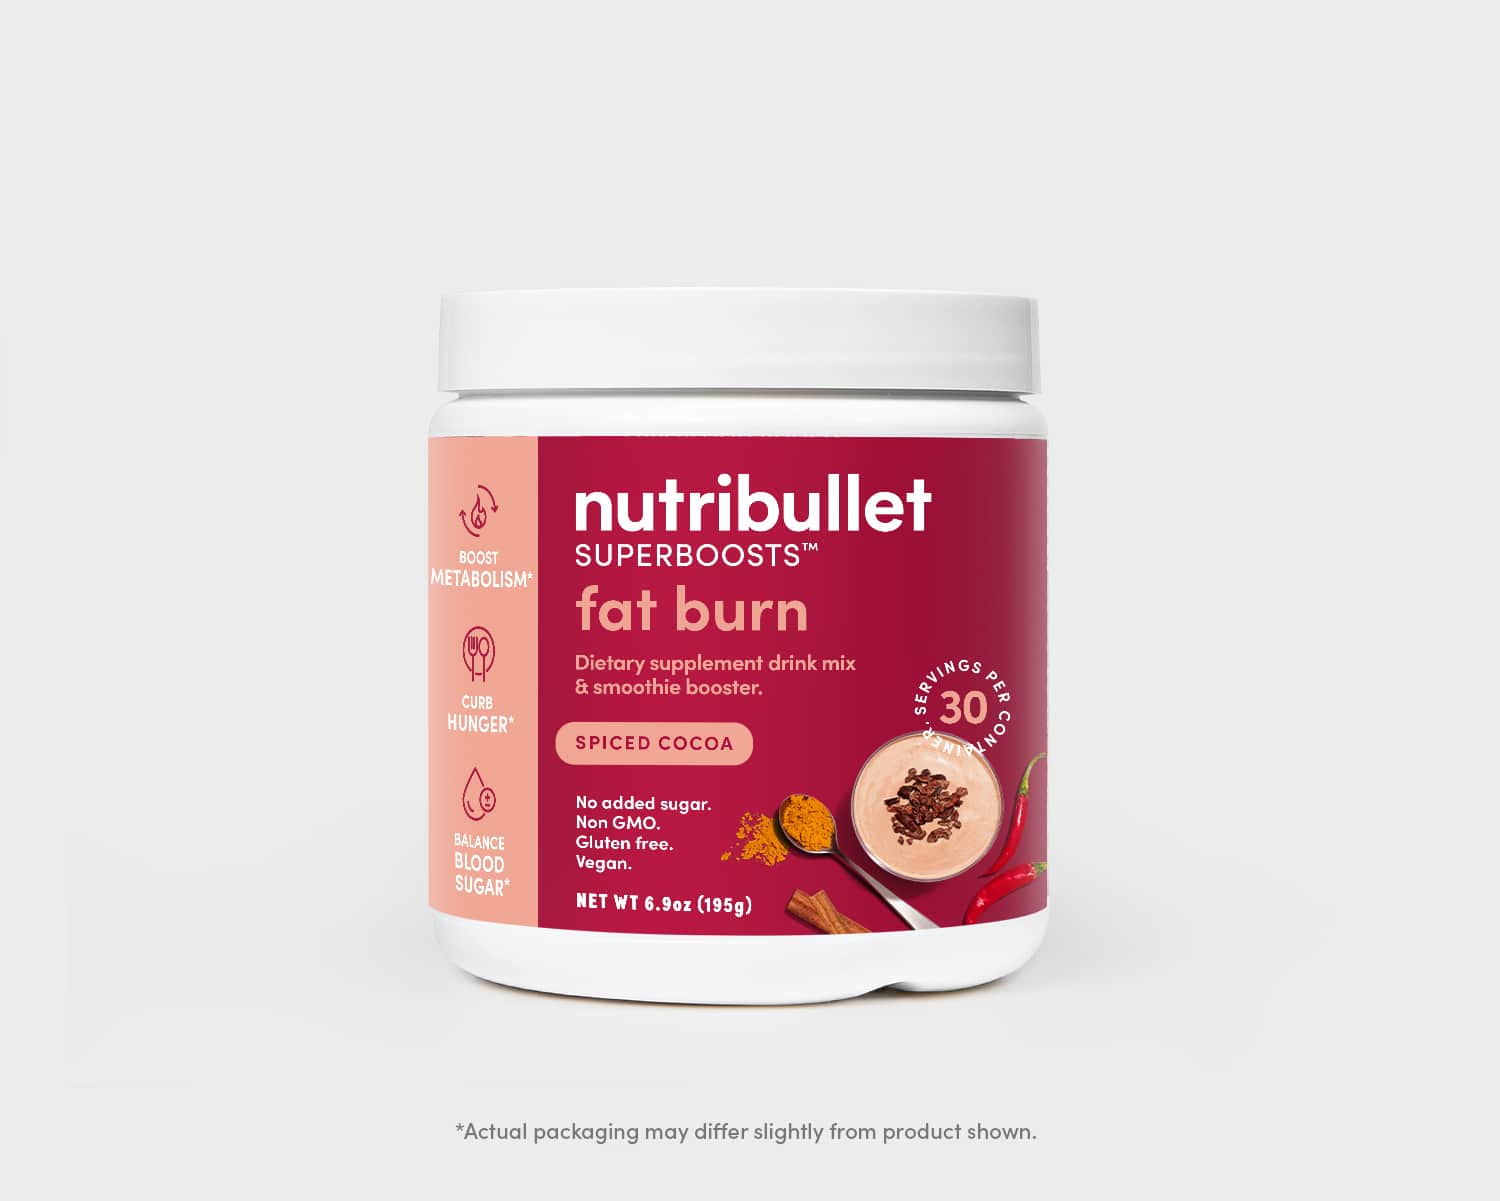 nutribullet Satisying Fat Burn 30 serving pink tub with smoothies, fruits, vegetables and powders label